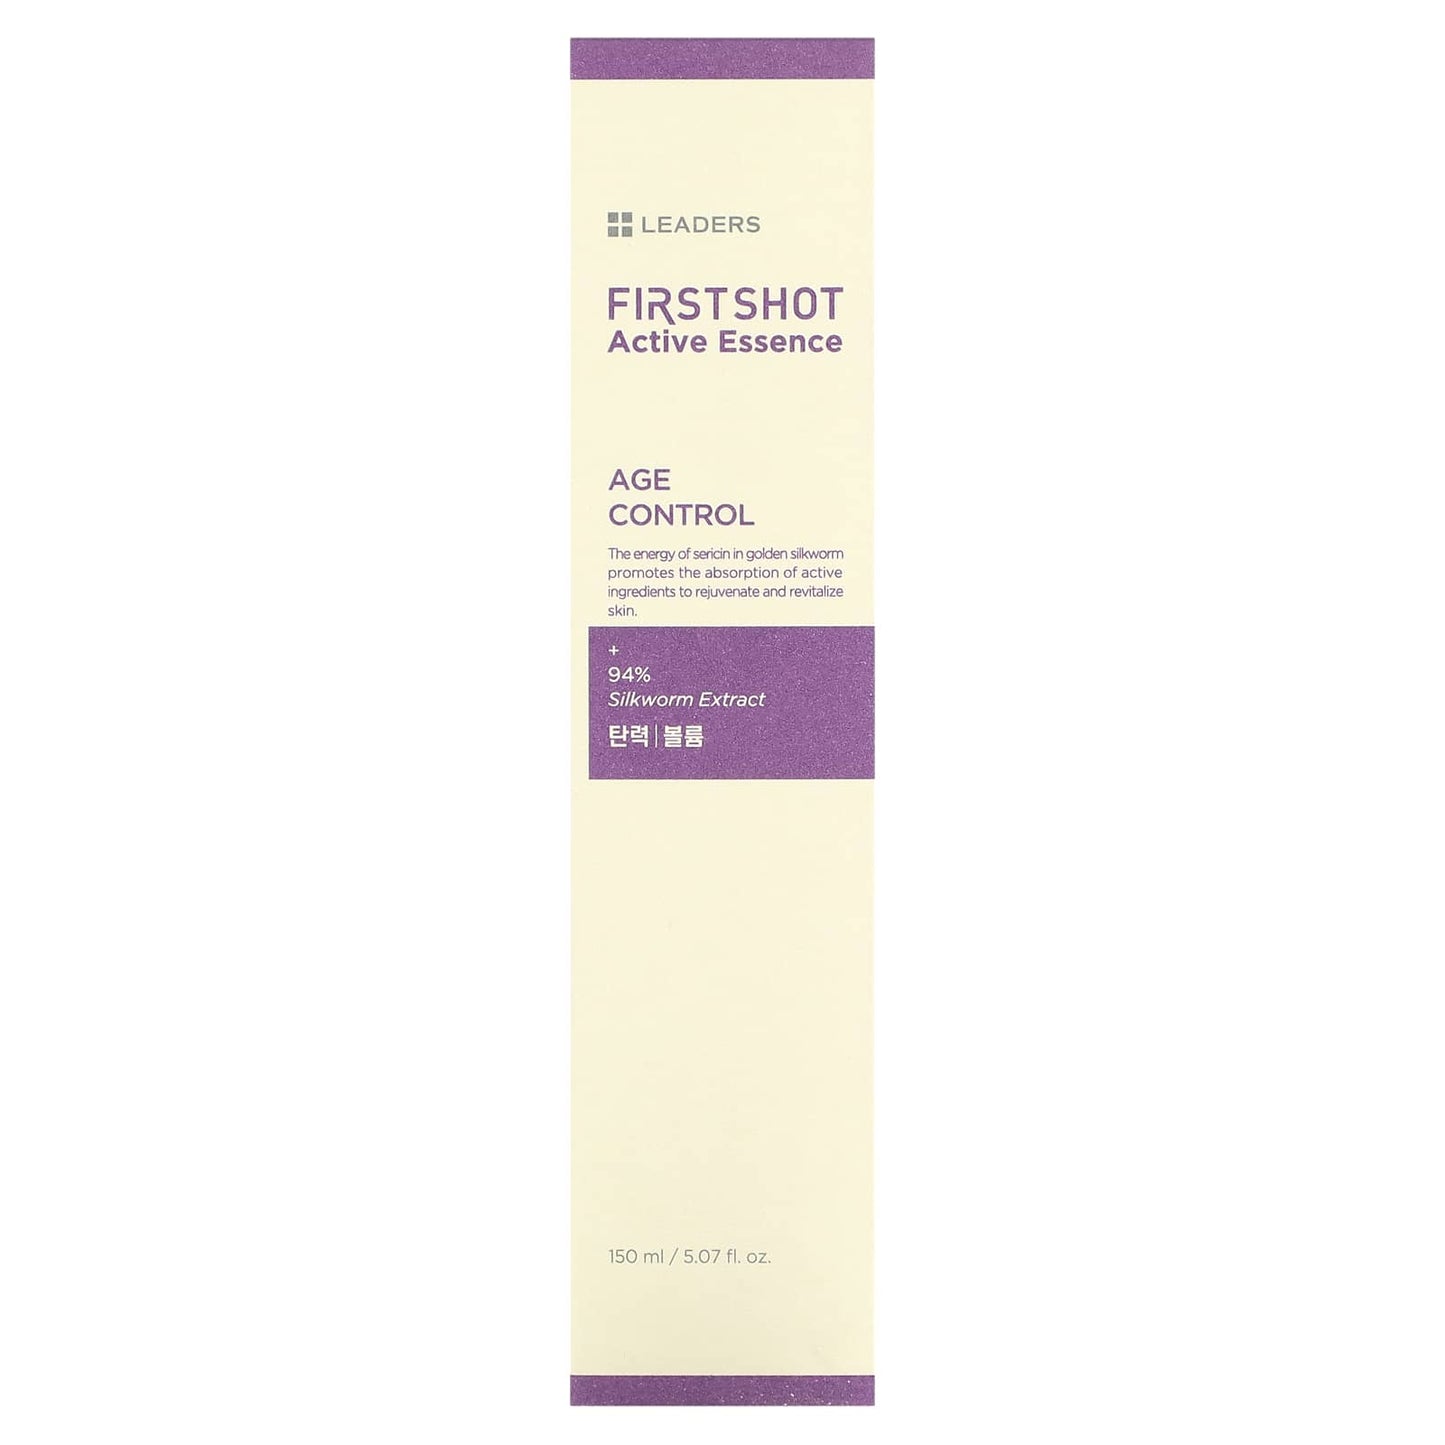 Leaders, First Shot Active Essence, Age Control, 5.07 fl oz (150 ml)